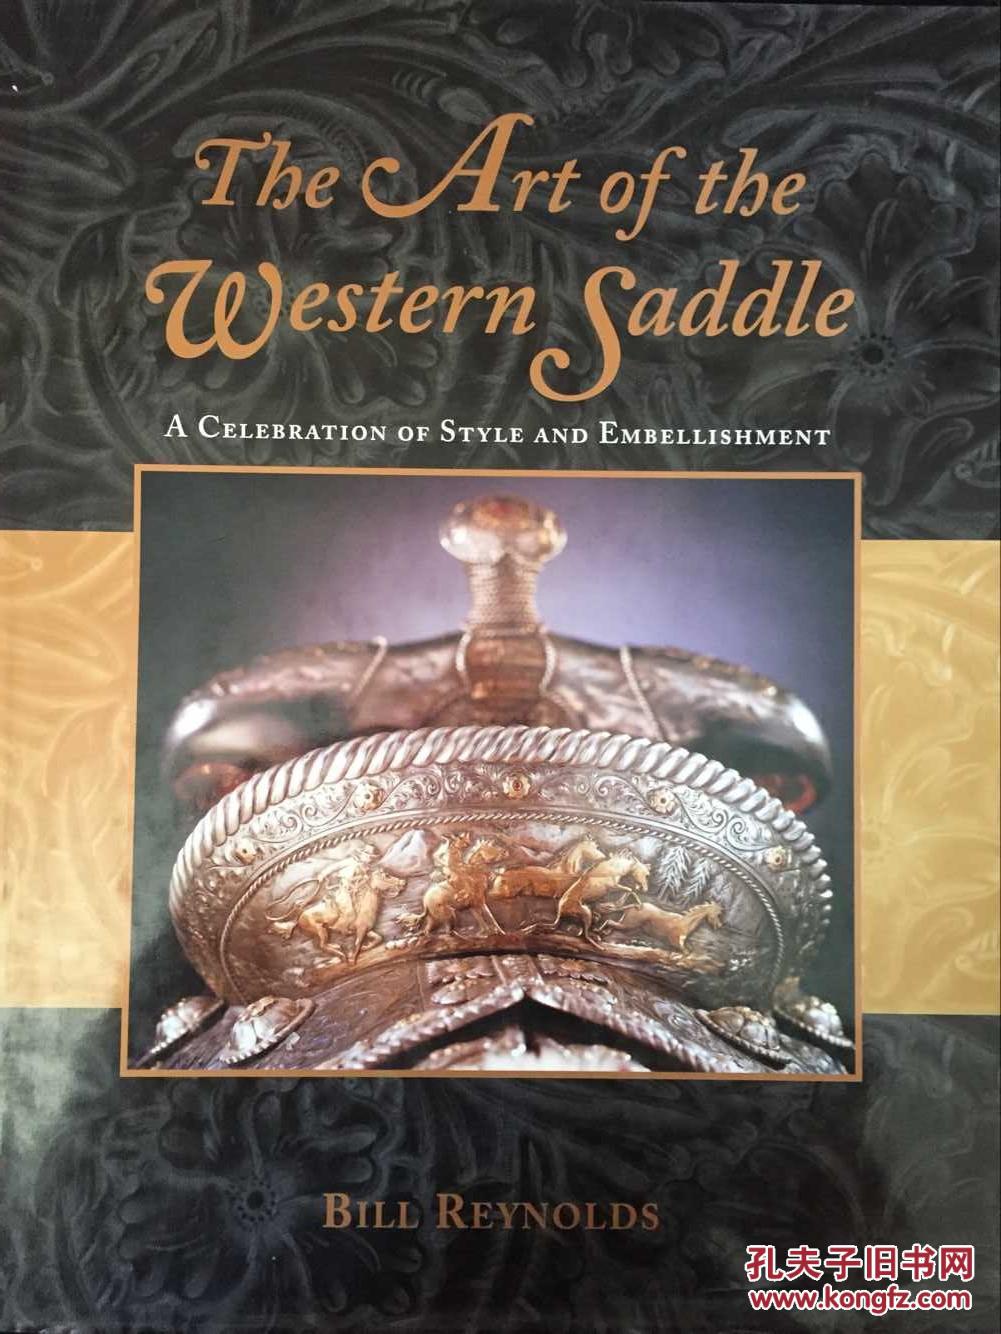 The Art of the Western Saddle: A Celebration of Style and Embellishment